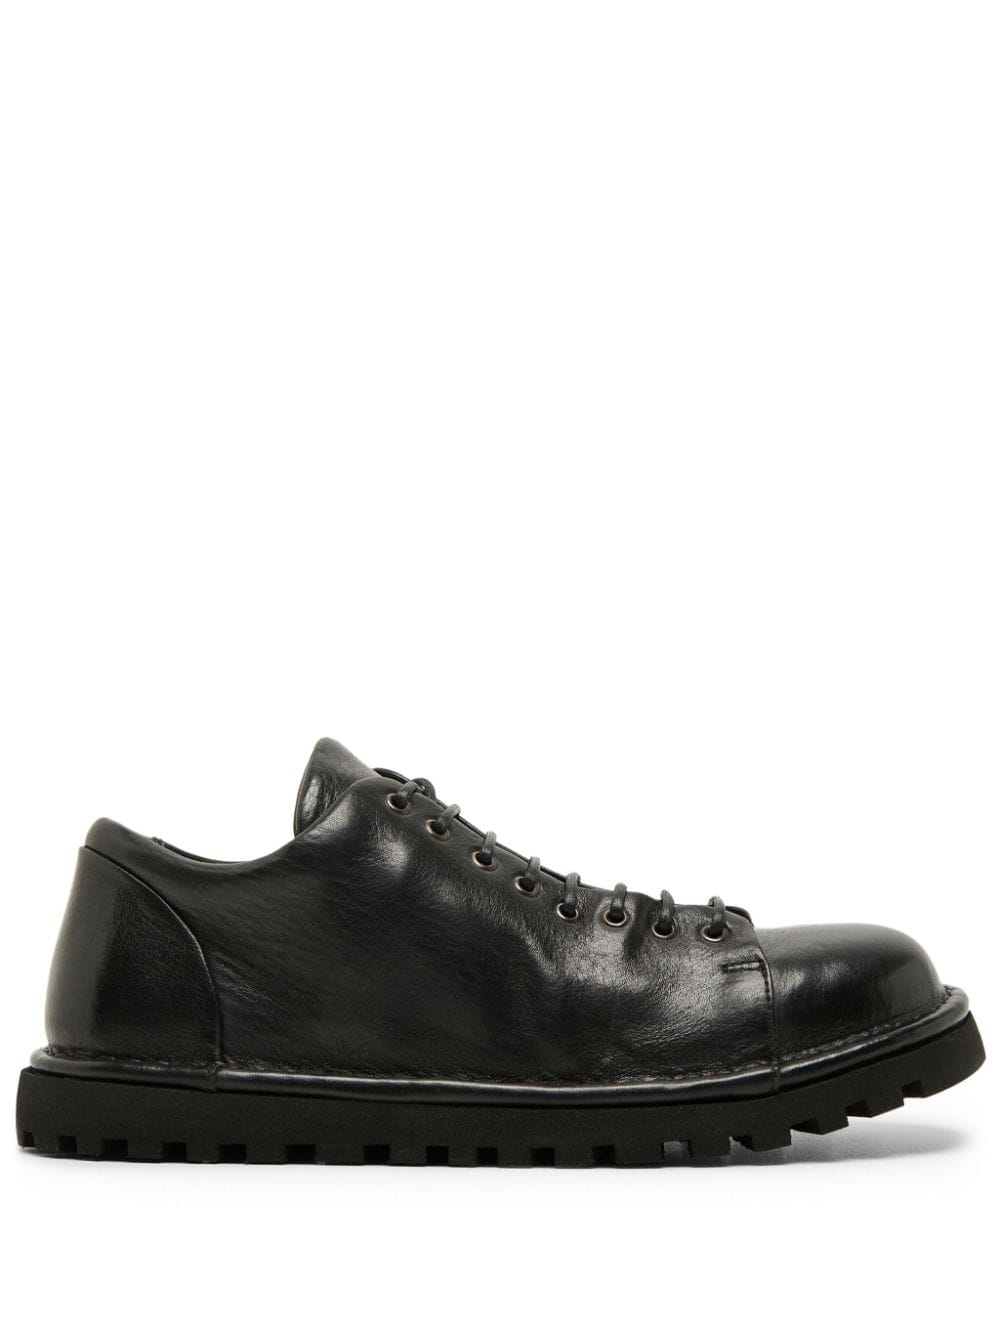 Marsèll Pallottola Pomice Derby Shoes In Black